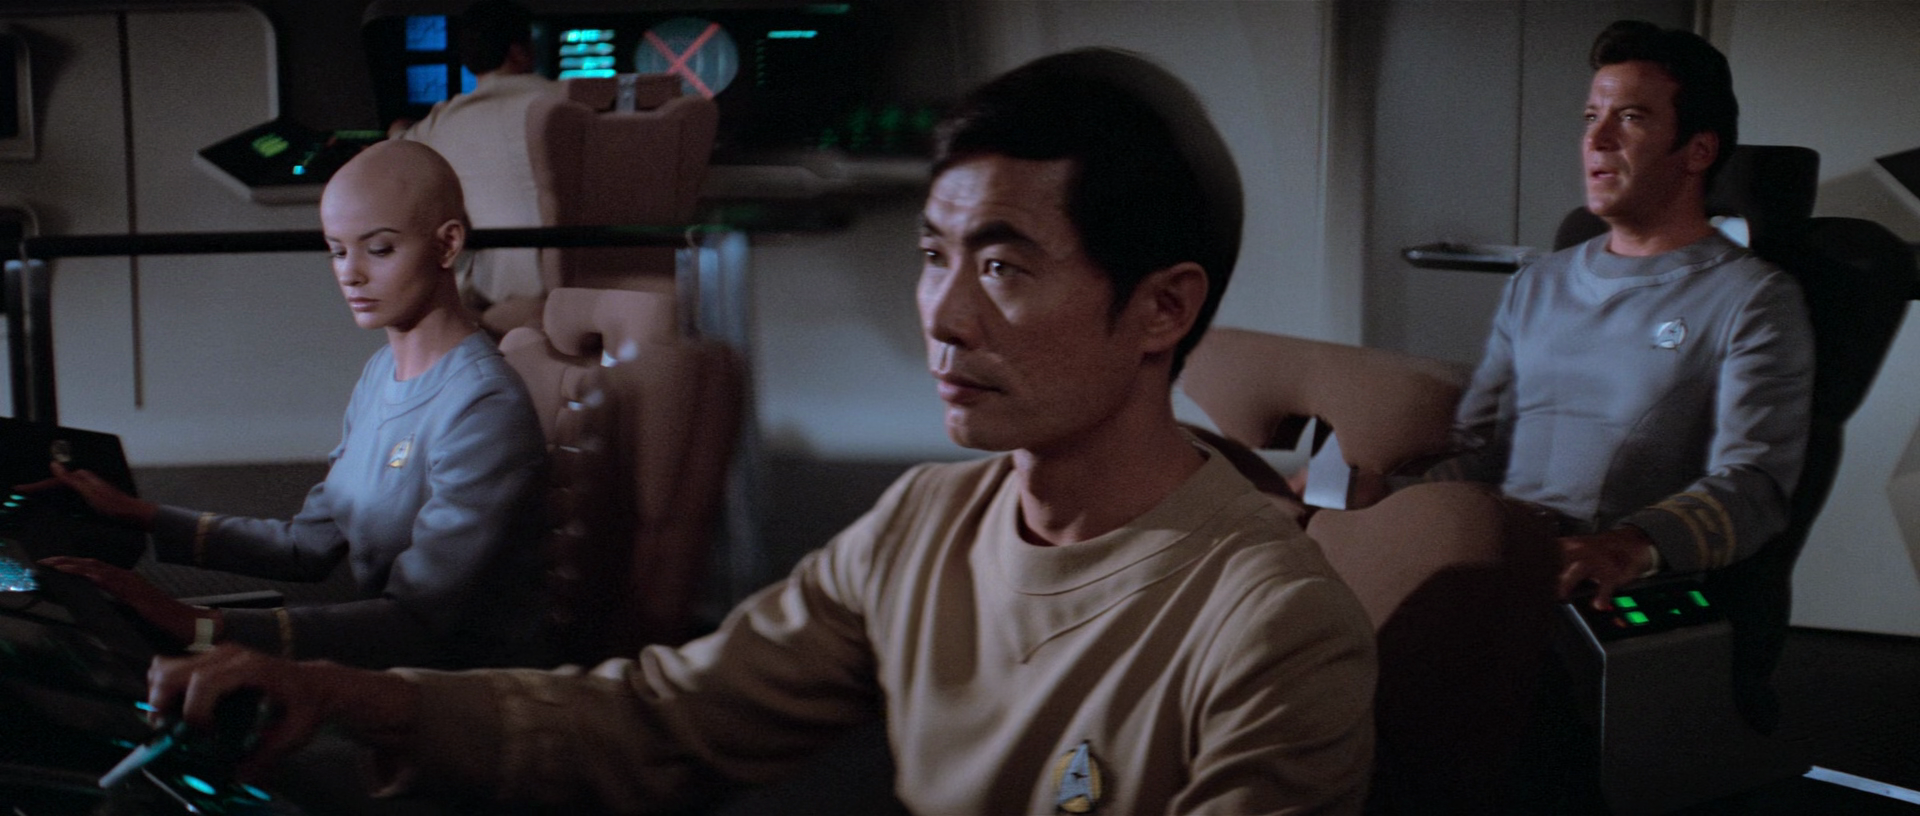 Sulu (George Takei) prepares to launch the newly refit Enterprise under the watchful eye of Captain Kirk (William Shatner) in Star Trek: The Motion Picture (1979), Paramount Pictures via Blu-ray